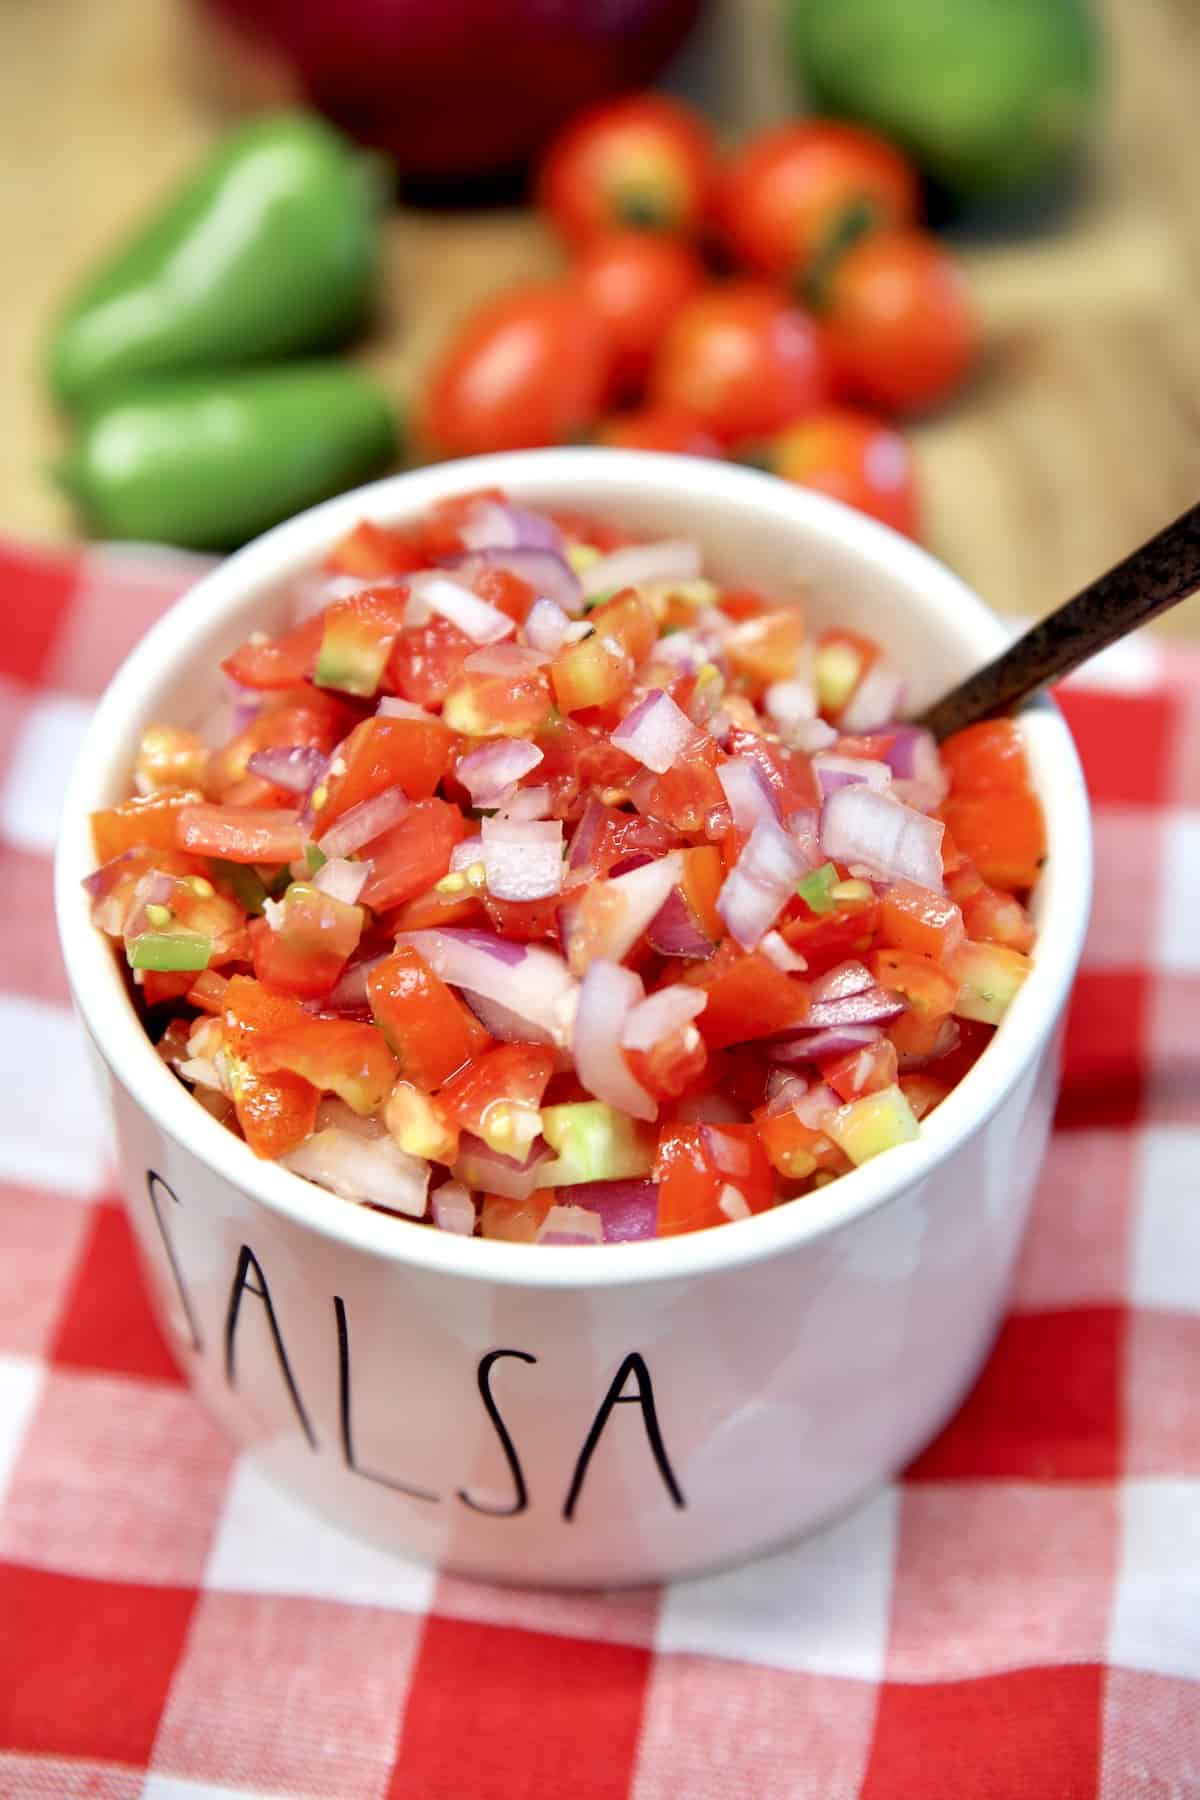 Bowl of fresh salsa with a spoon, vegetables in the background.